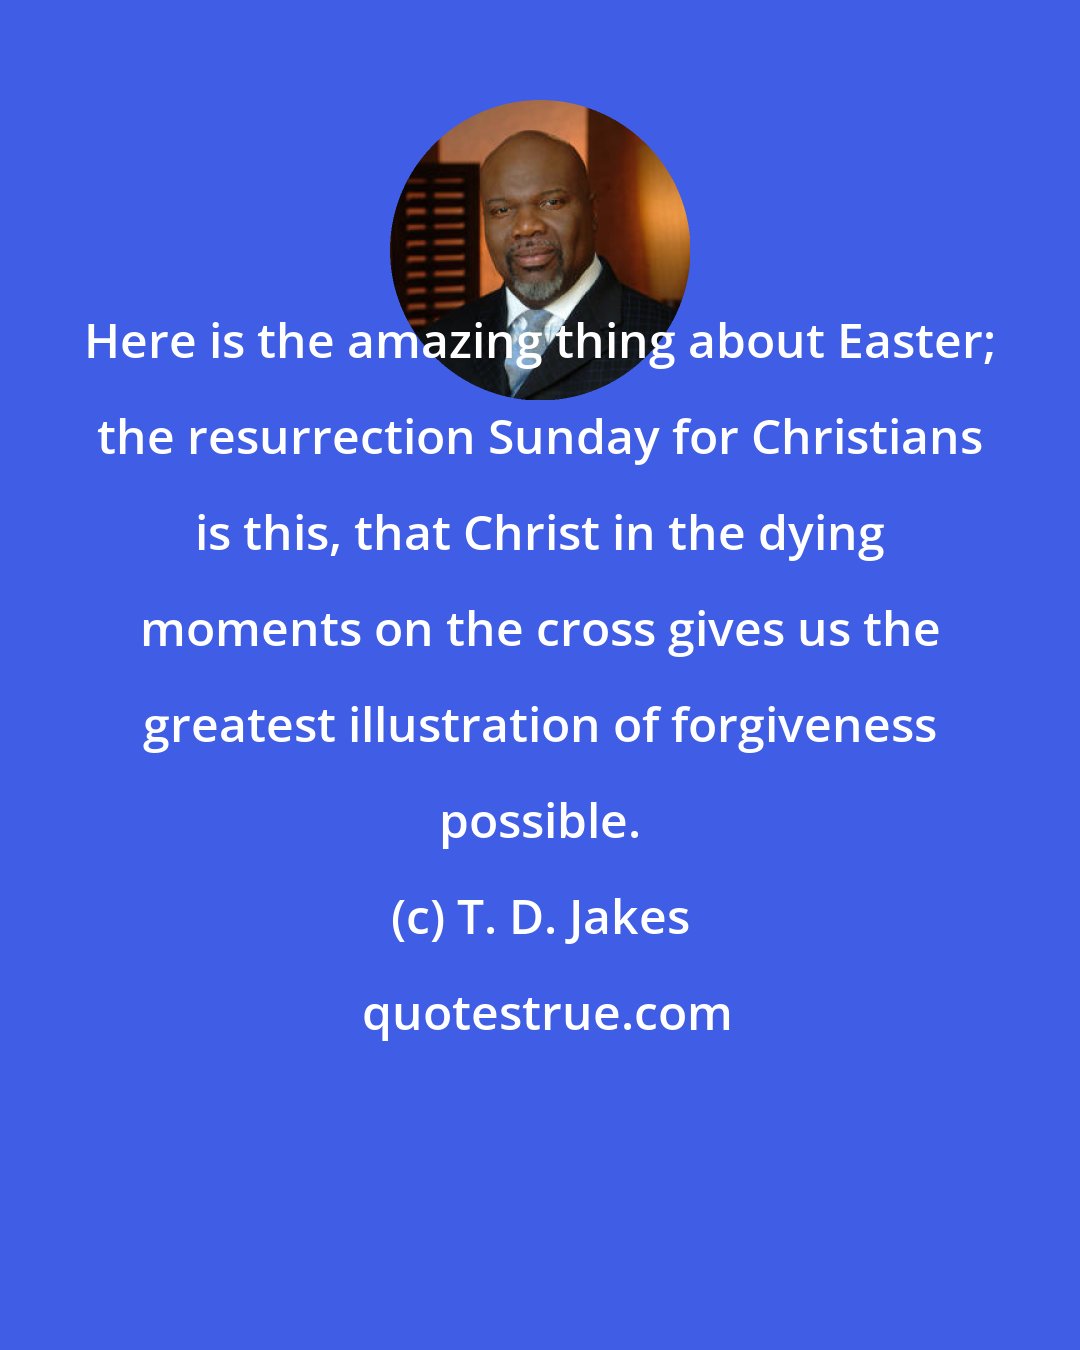 T. D. Jakes: Here is the amazing thing about Easter; the resurrection Sunday for Christians is this, that Christ in the dying moments on the cross gives us the greatest illustration of forgiveness possible.